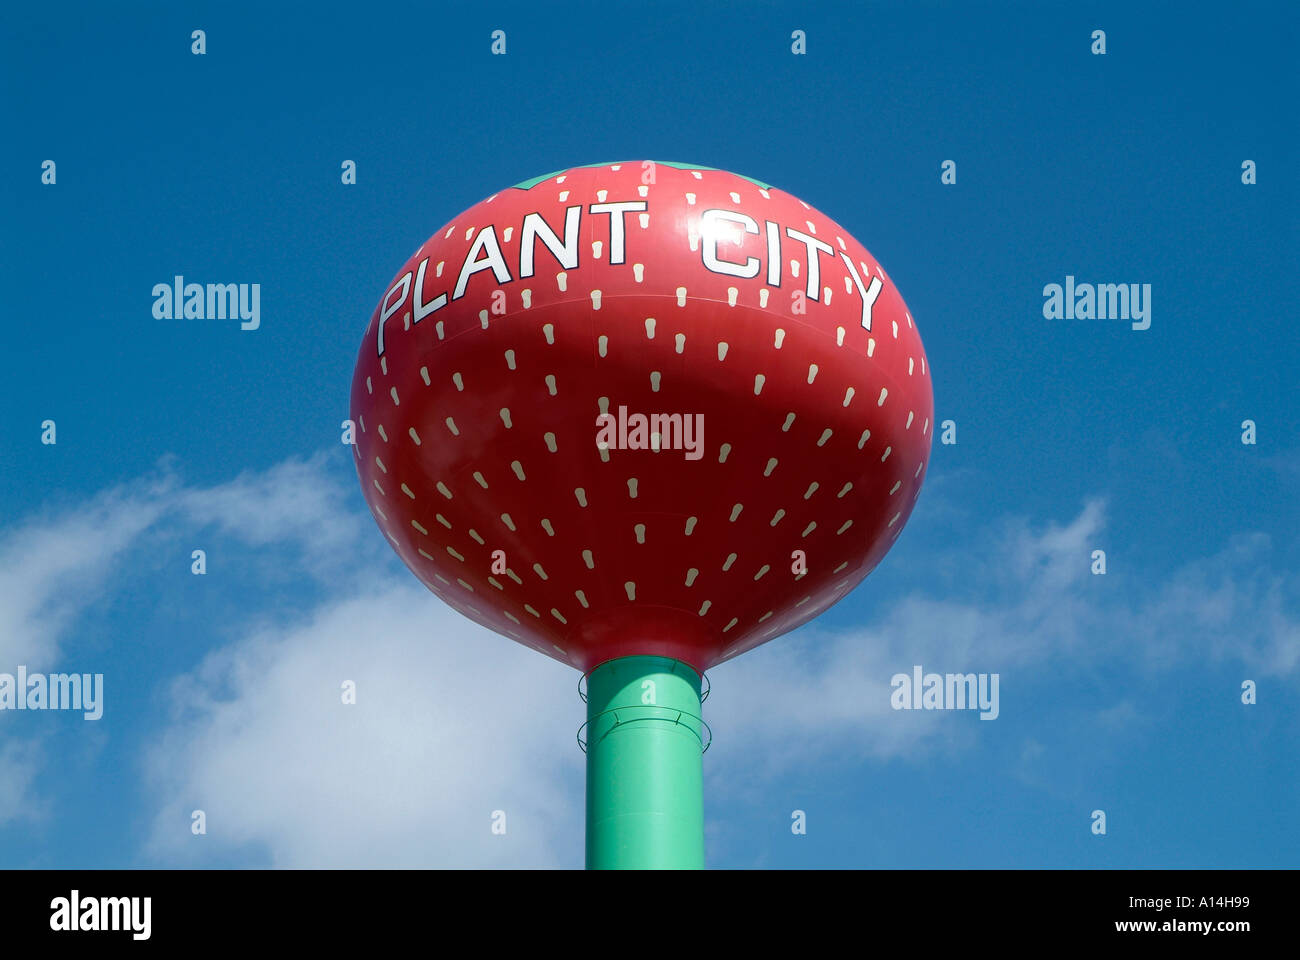 Plant City Florida water tower symbolizes the strawberry capital of Flower at Plant City Florida Stock Photo